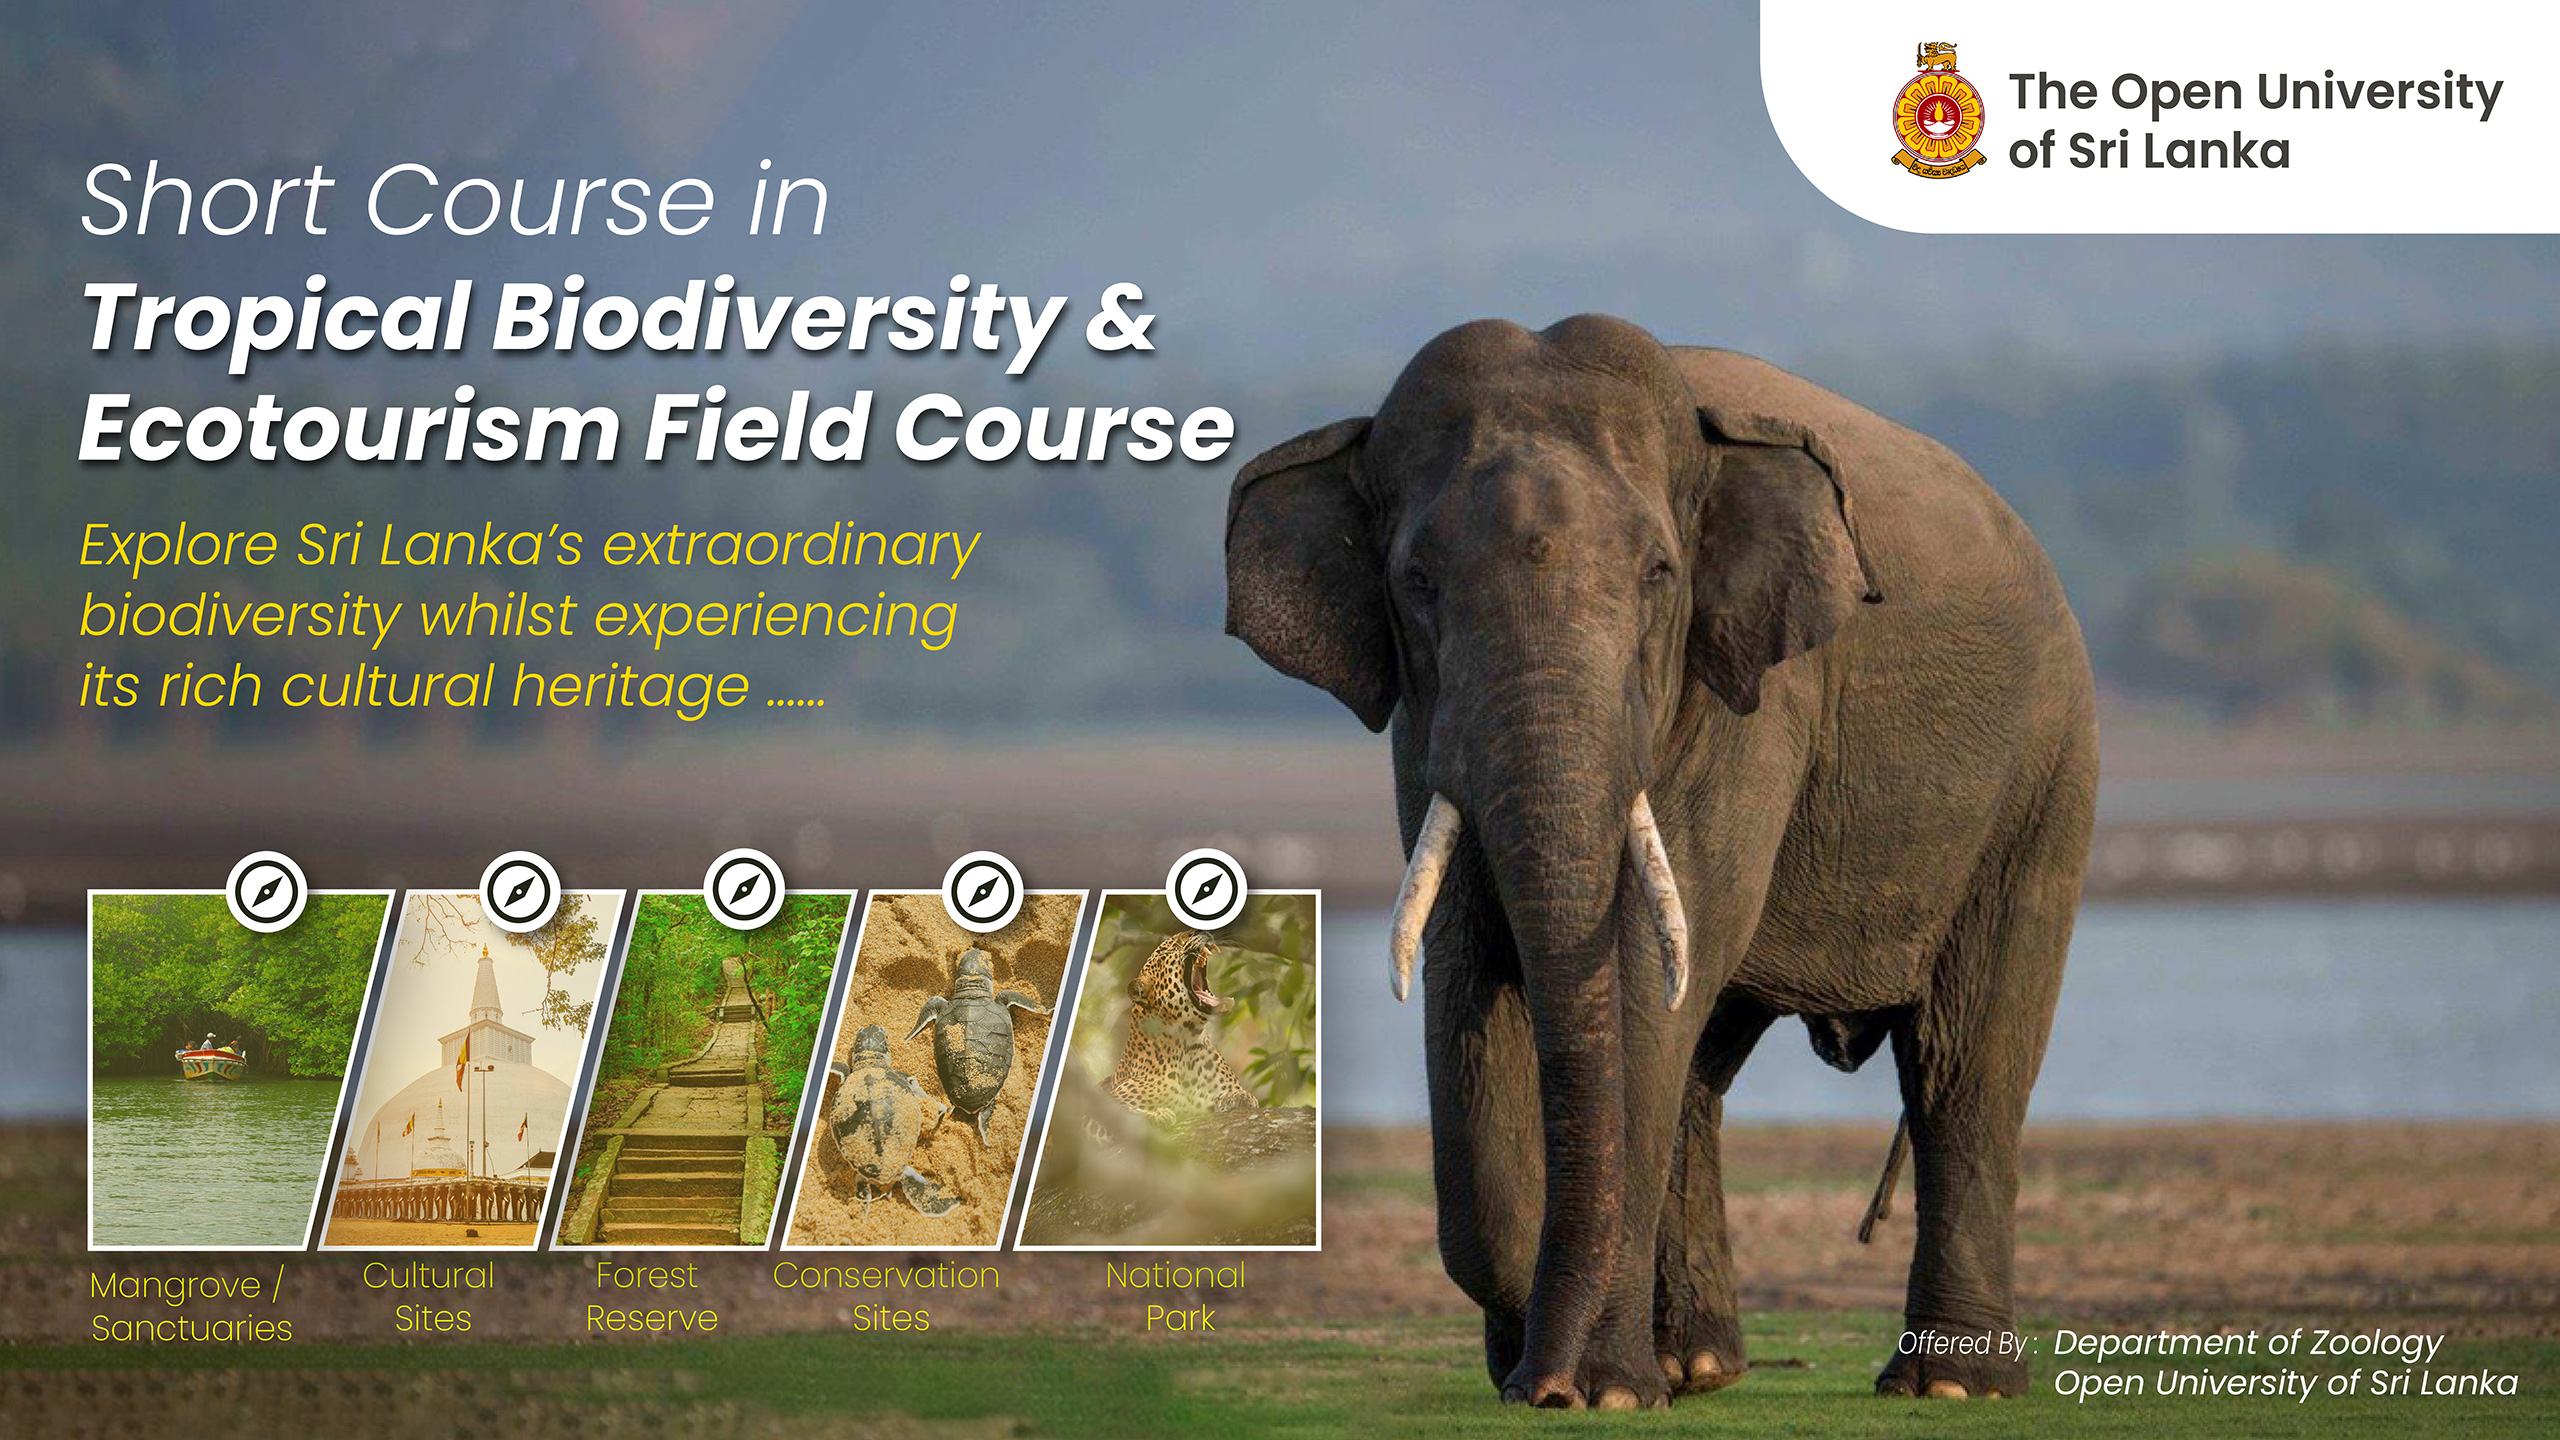 Short Course in Tropical Biodiversity and Ecotourism Field